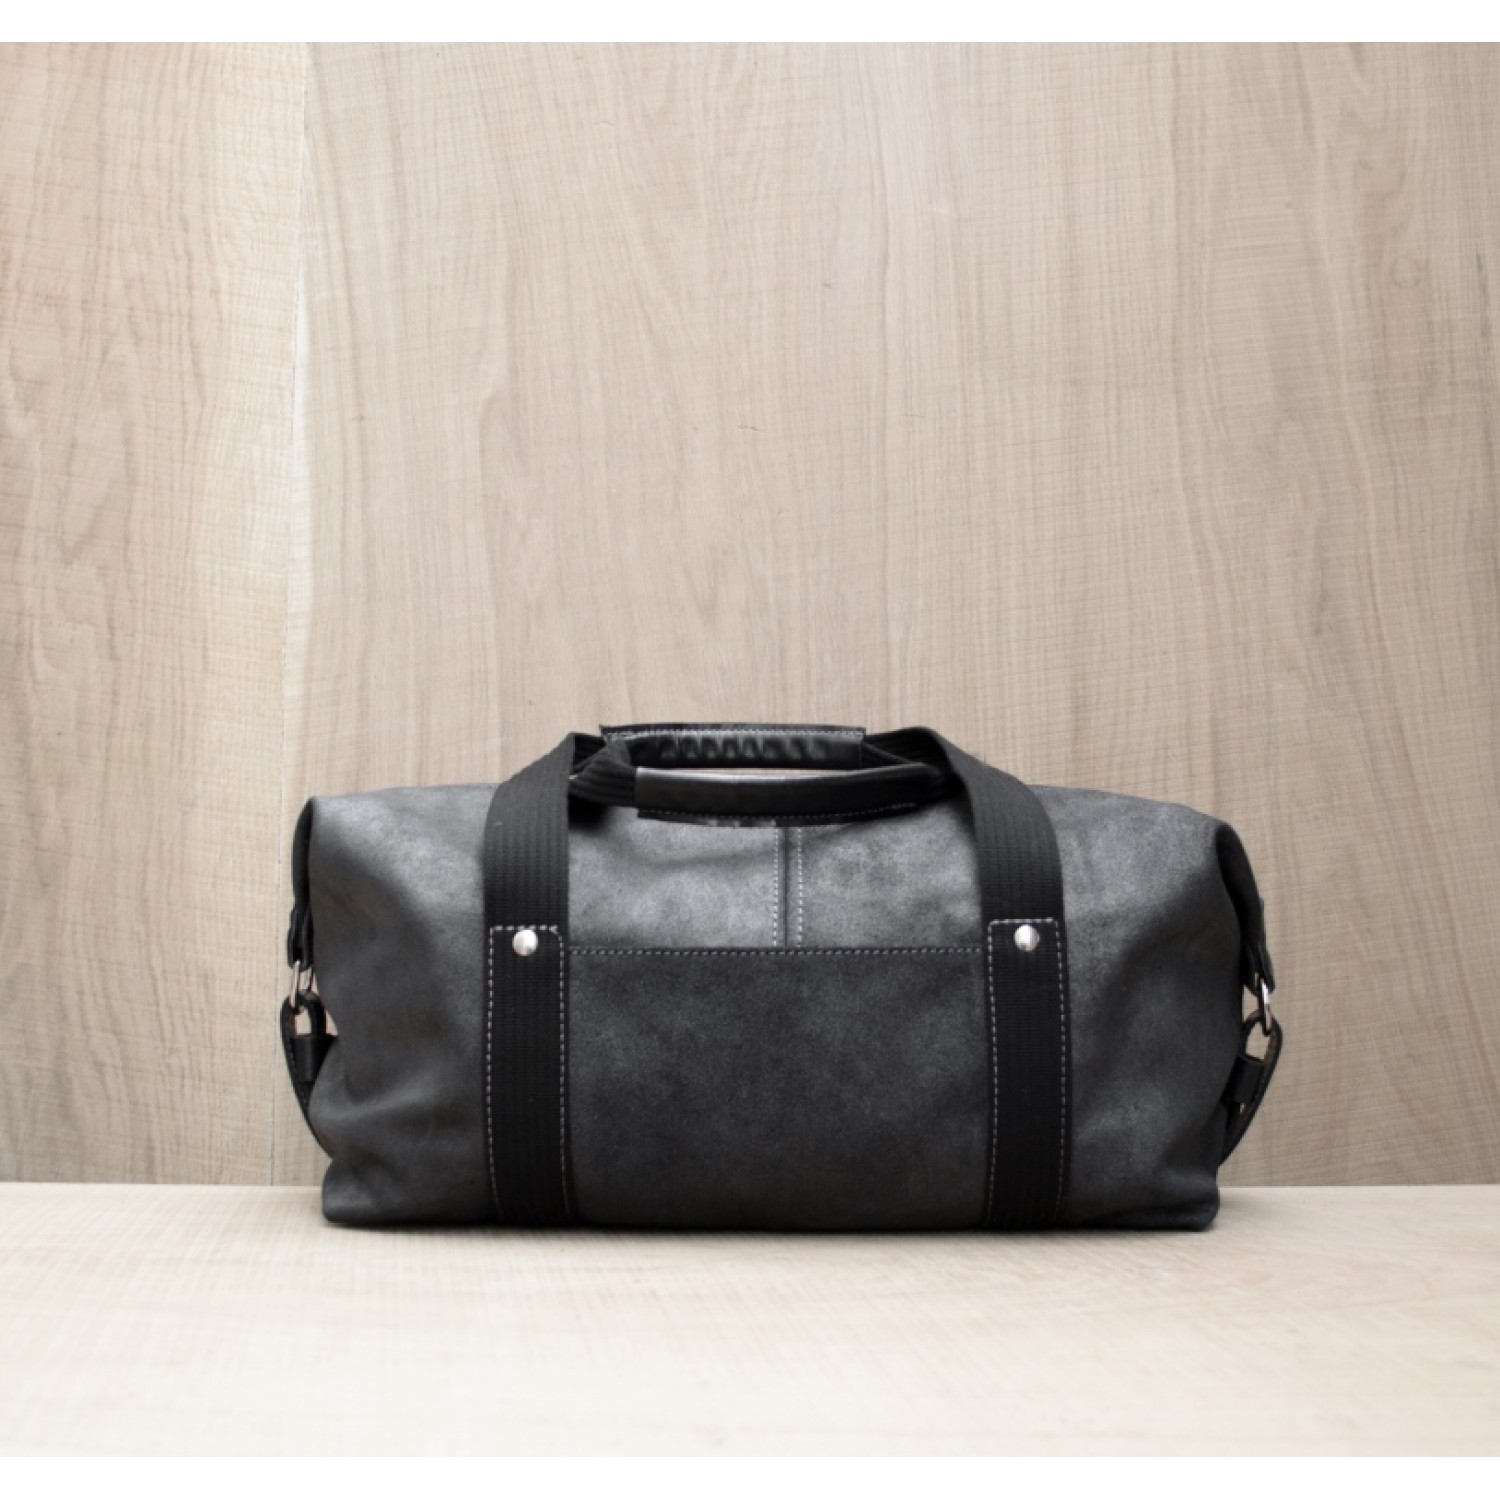 Sac de voyage toile & cuir Homme - Made in France